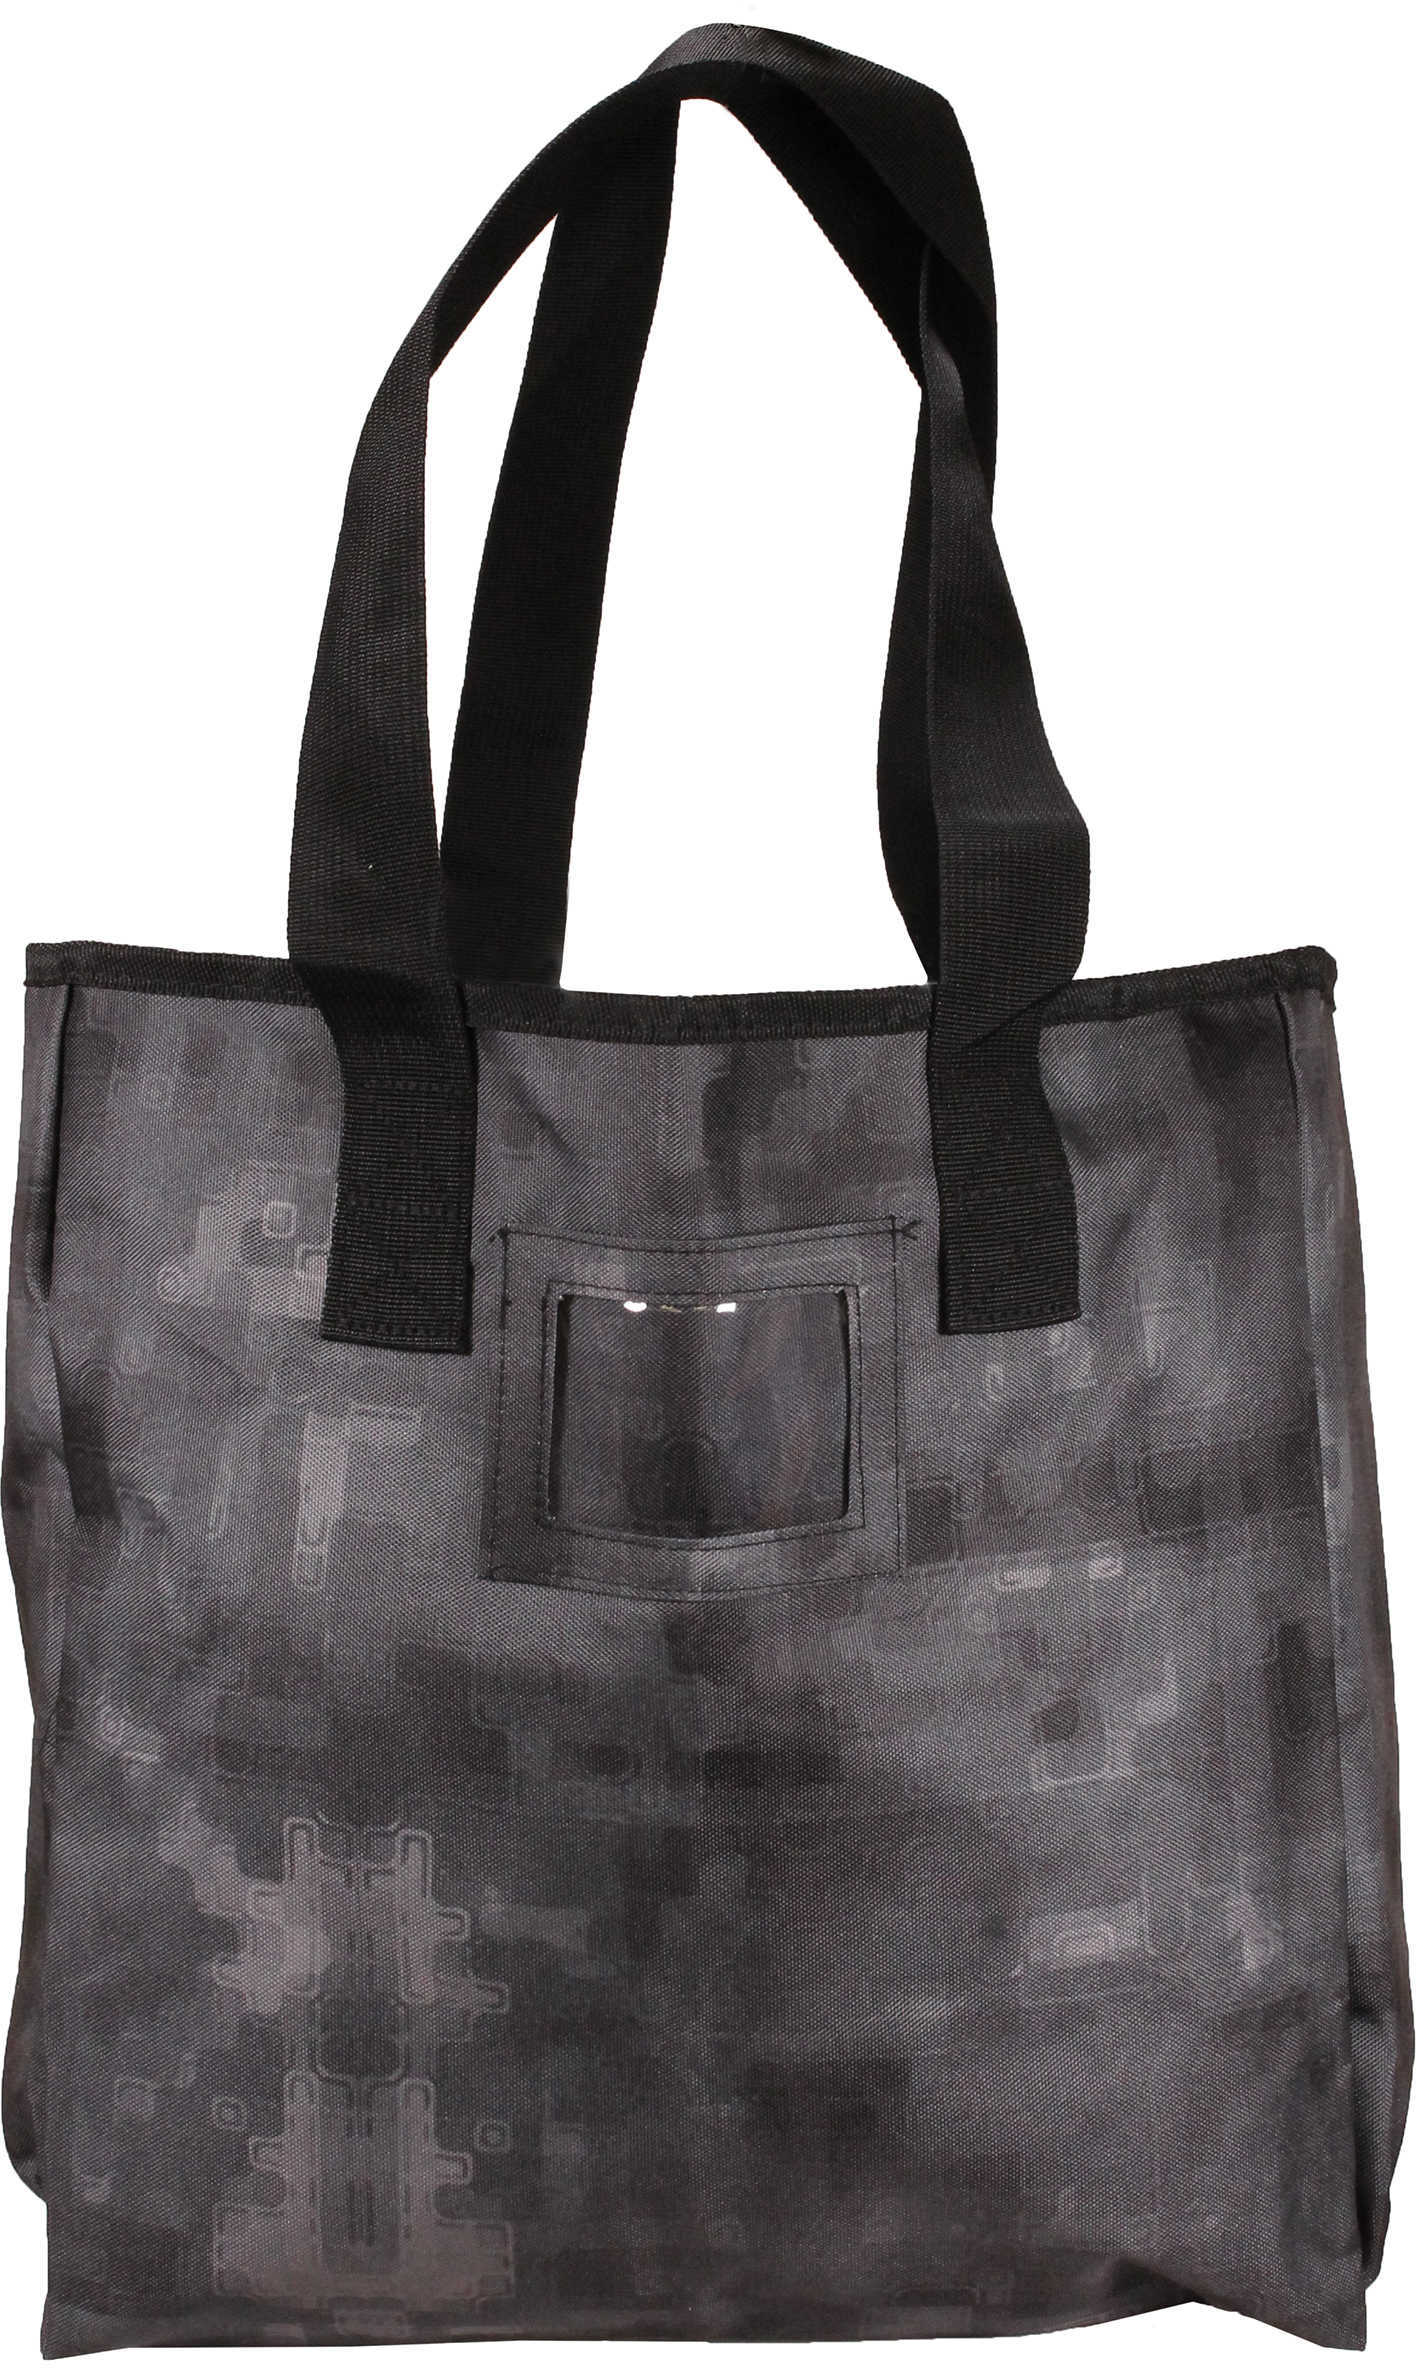 VISM Groccery Shopping Bag Black Camouflage